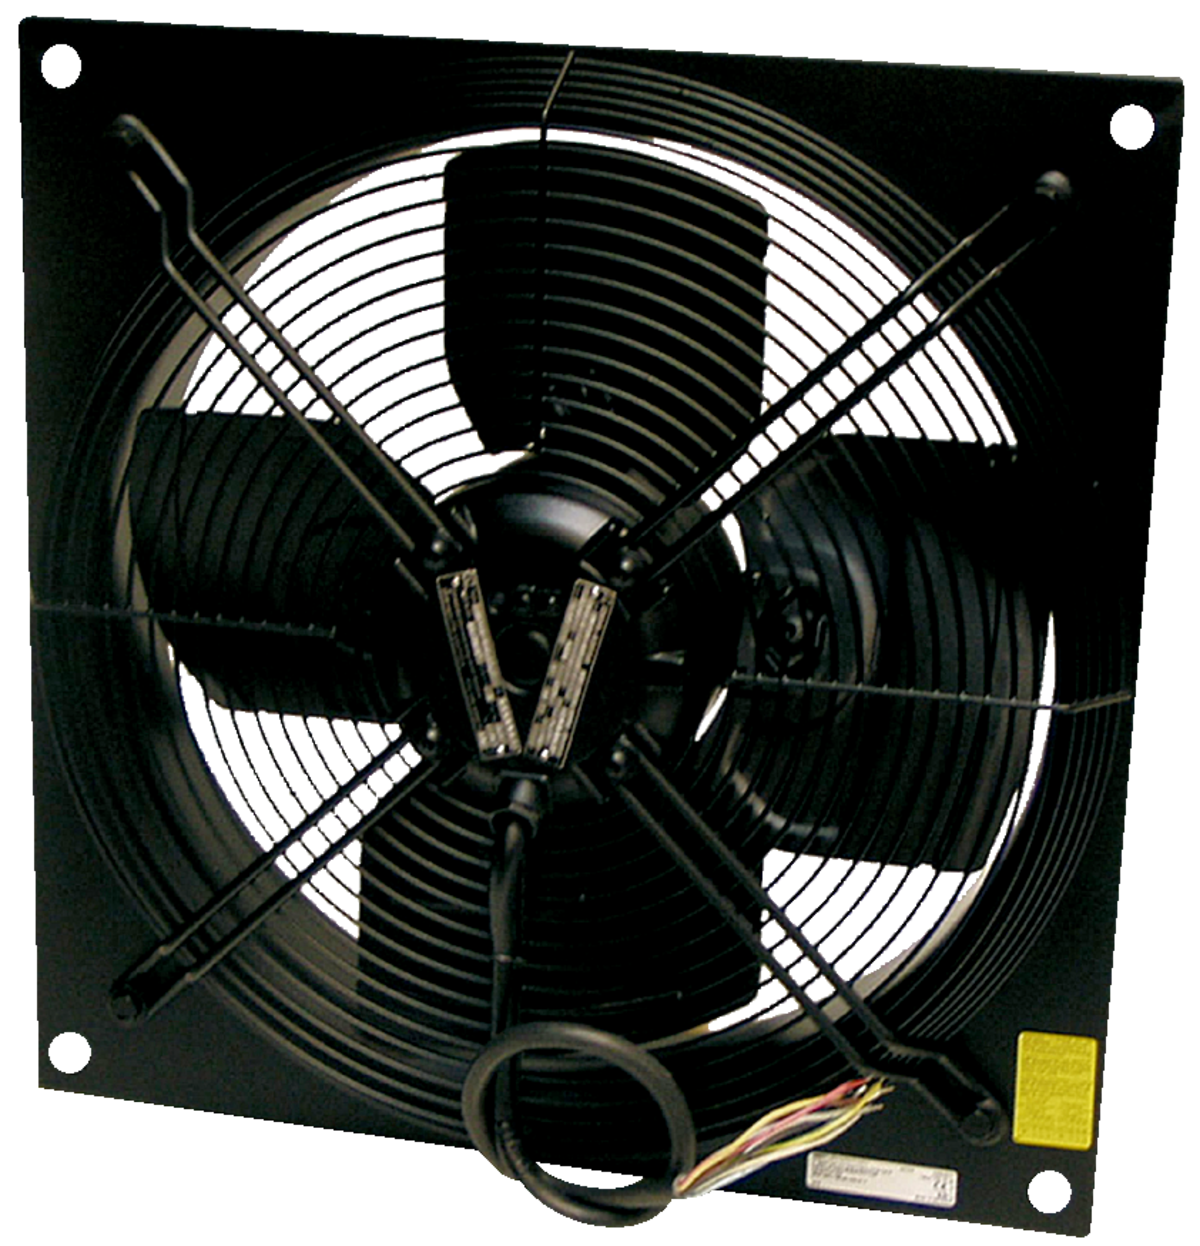 AW-EX - Axial Fans - Fans - Products - Systemair